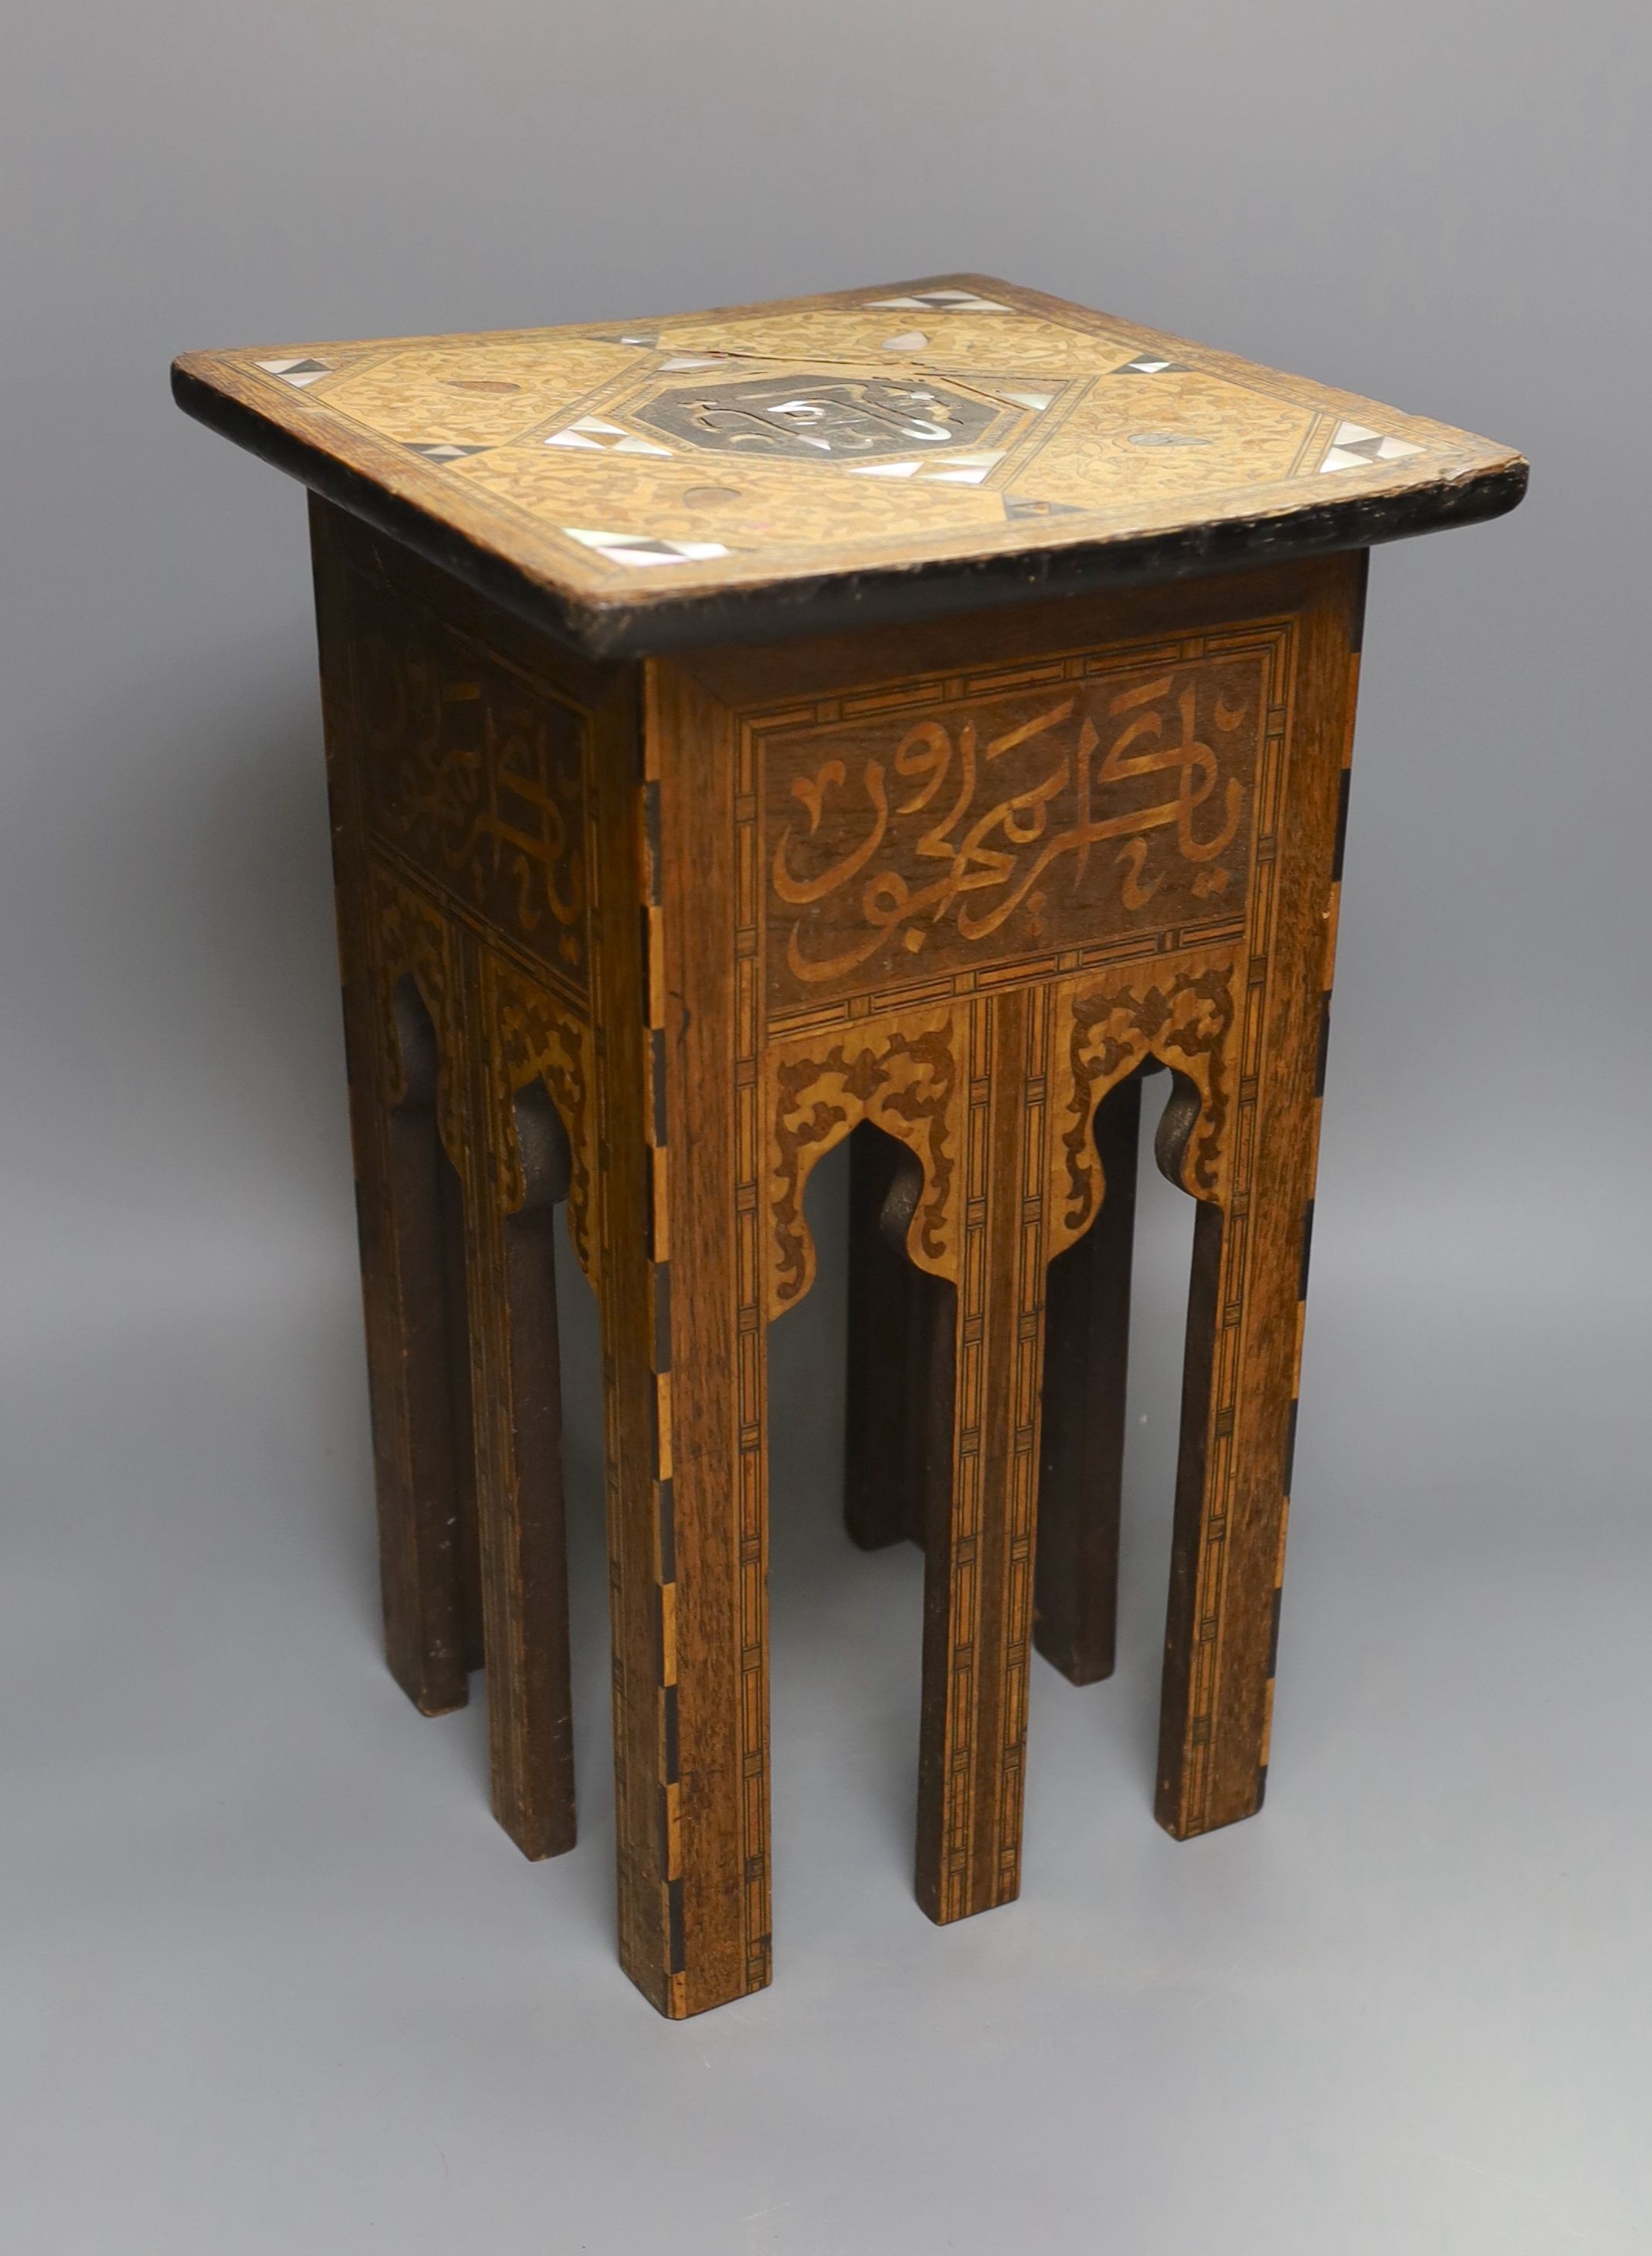 A Middle-Eastern inlaid plant stand - 43cm tall